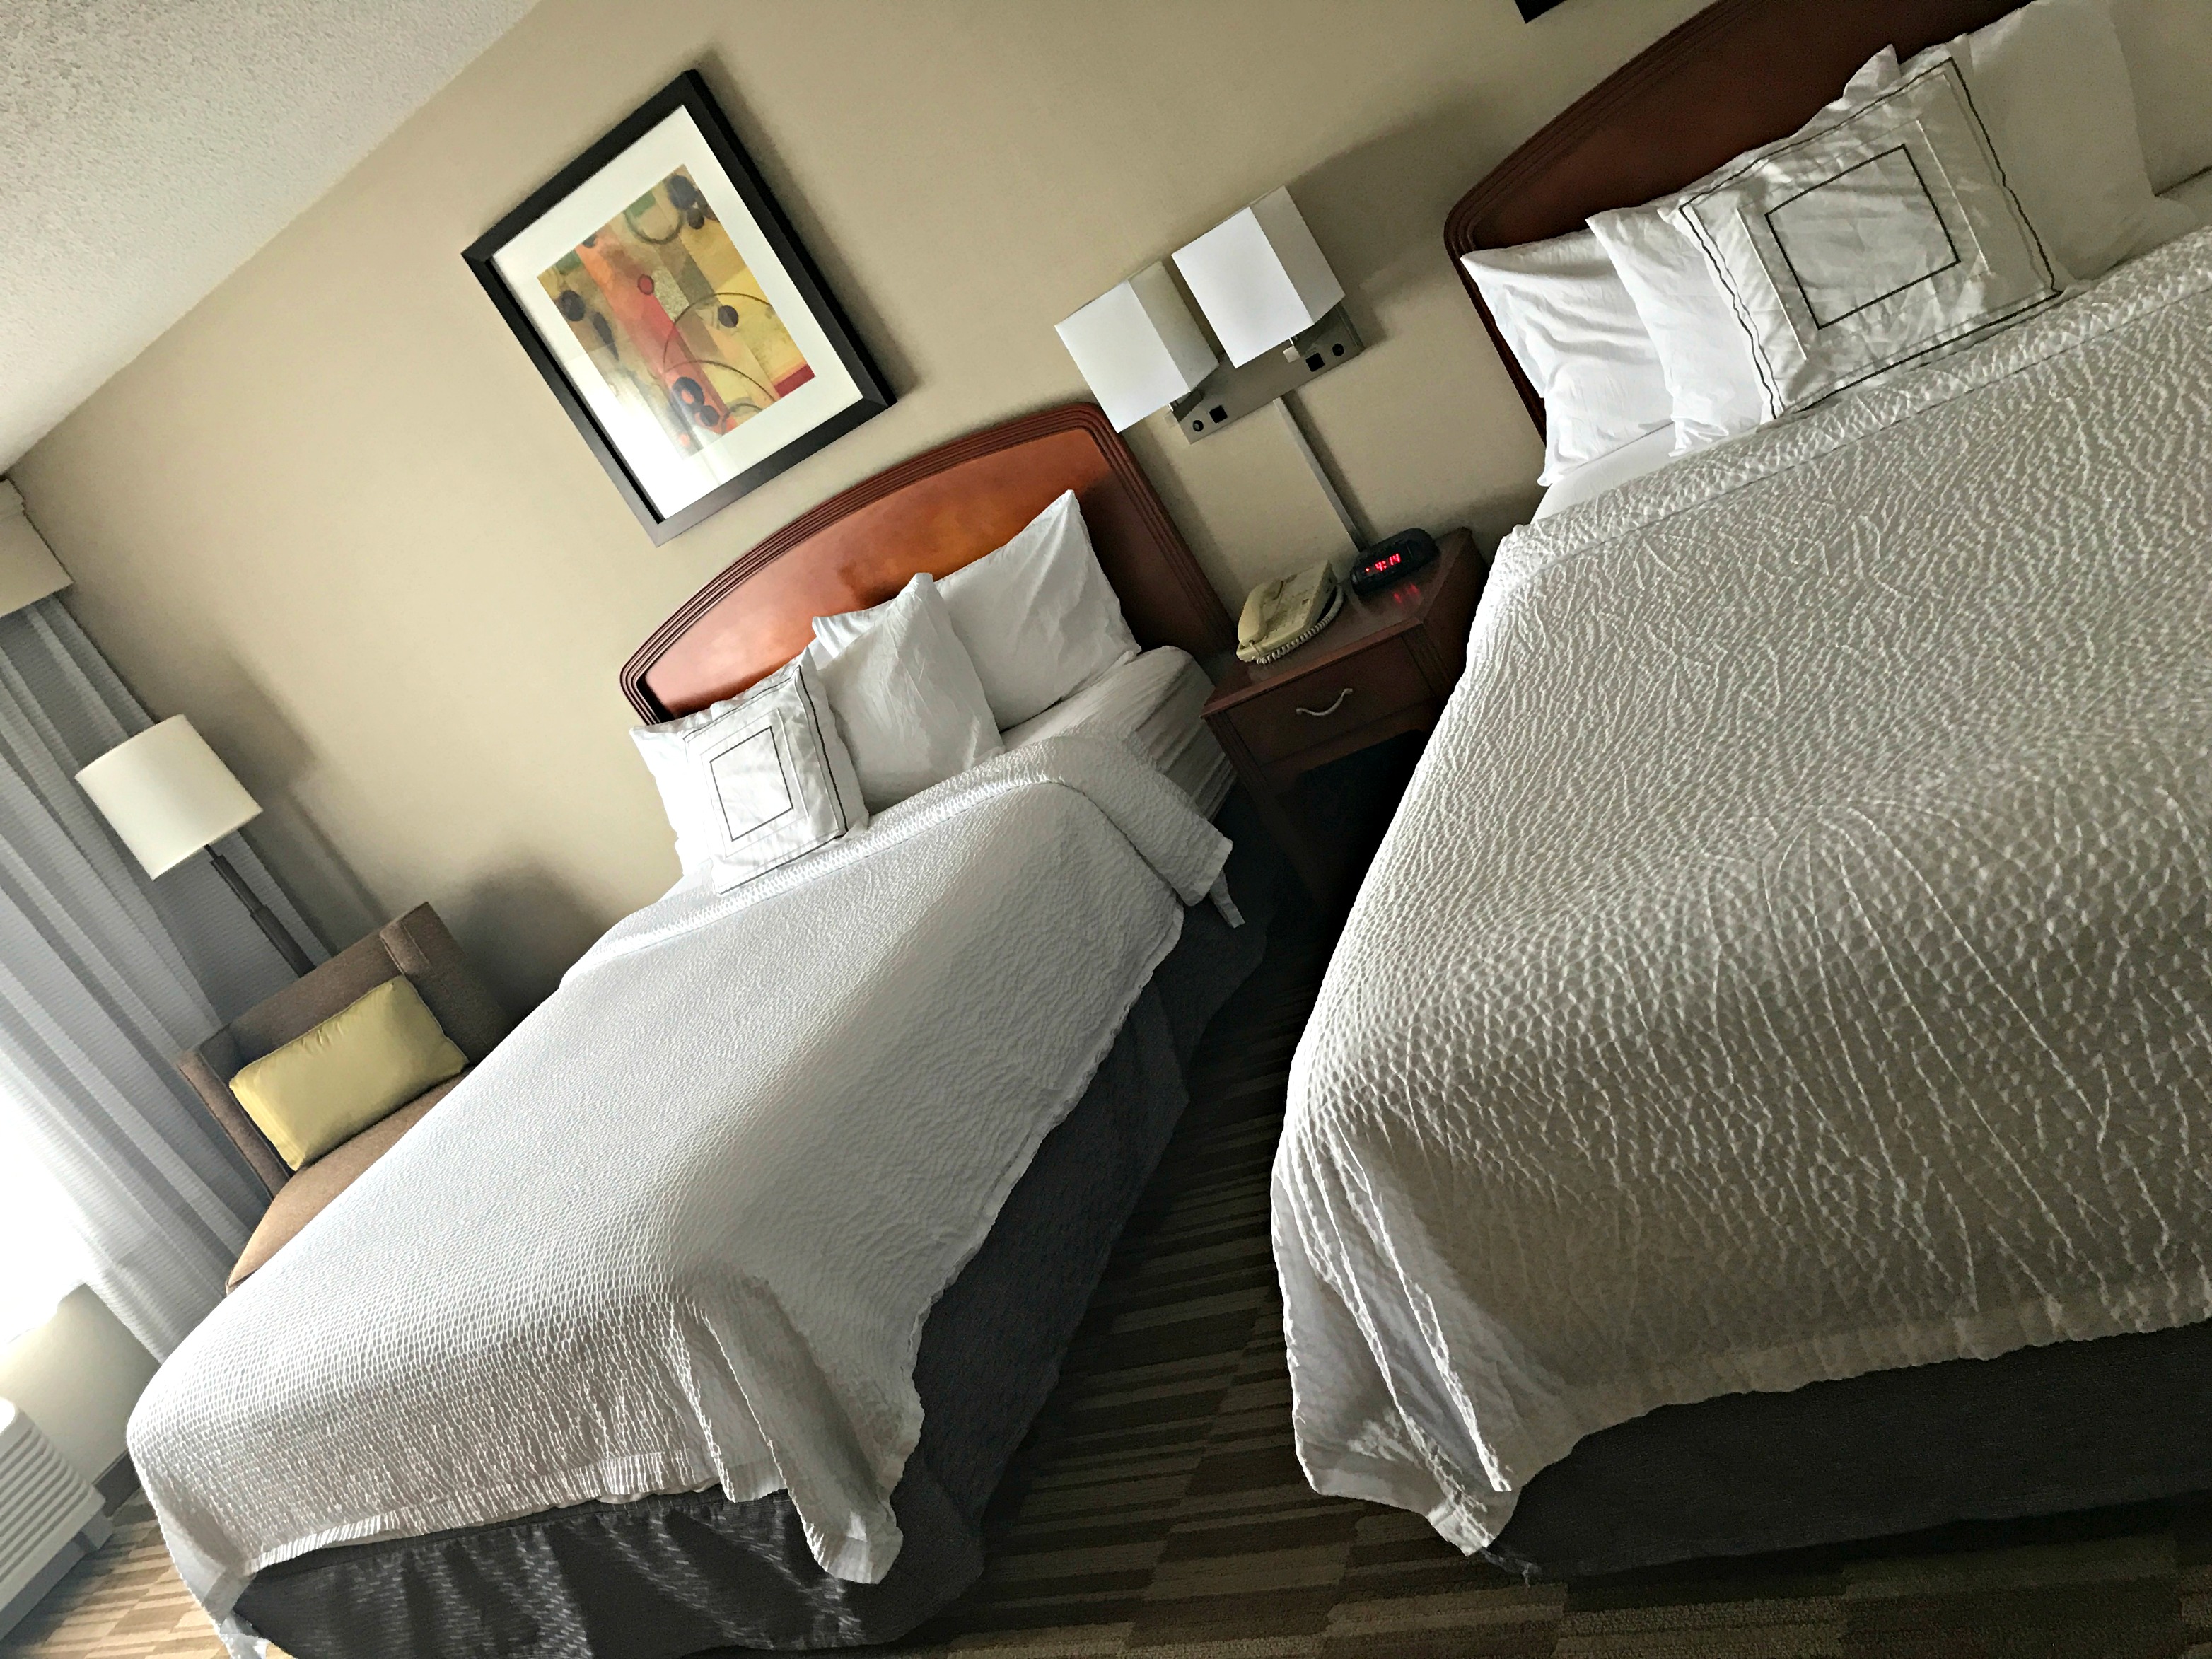 Staying at the Courtyard Marriott in Roseville, MN